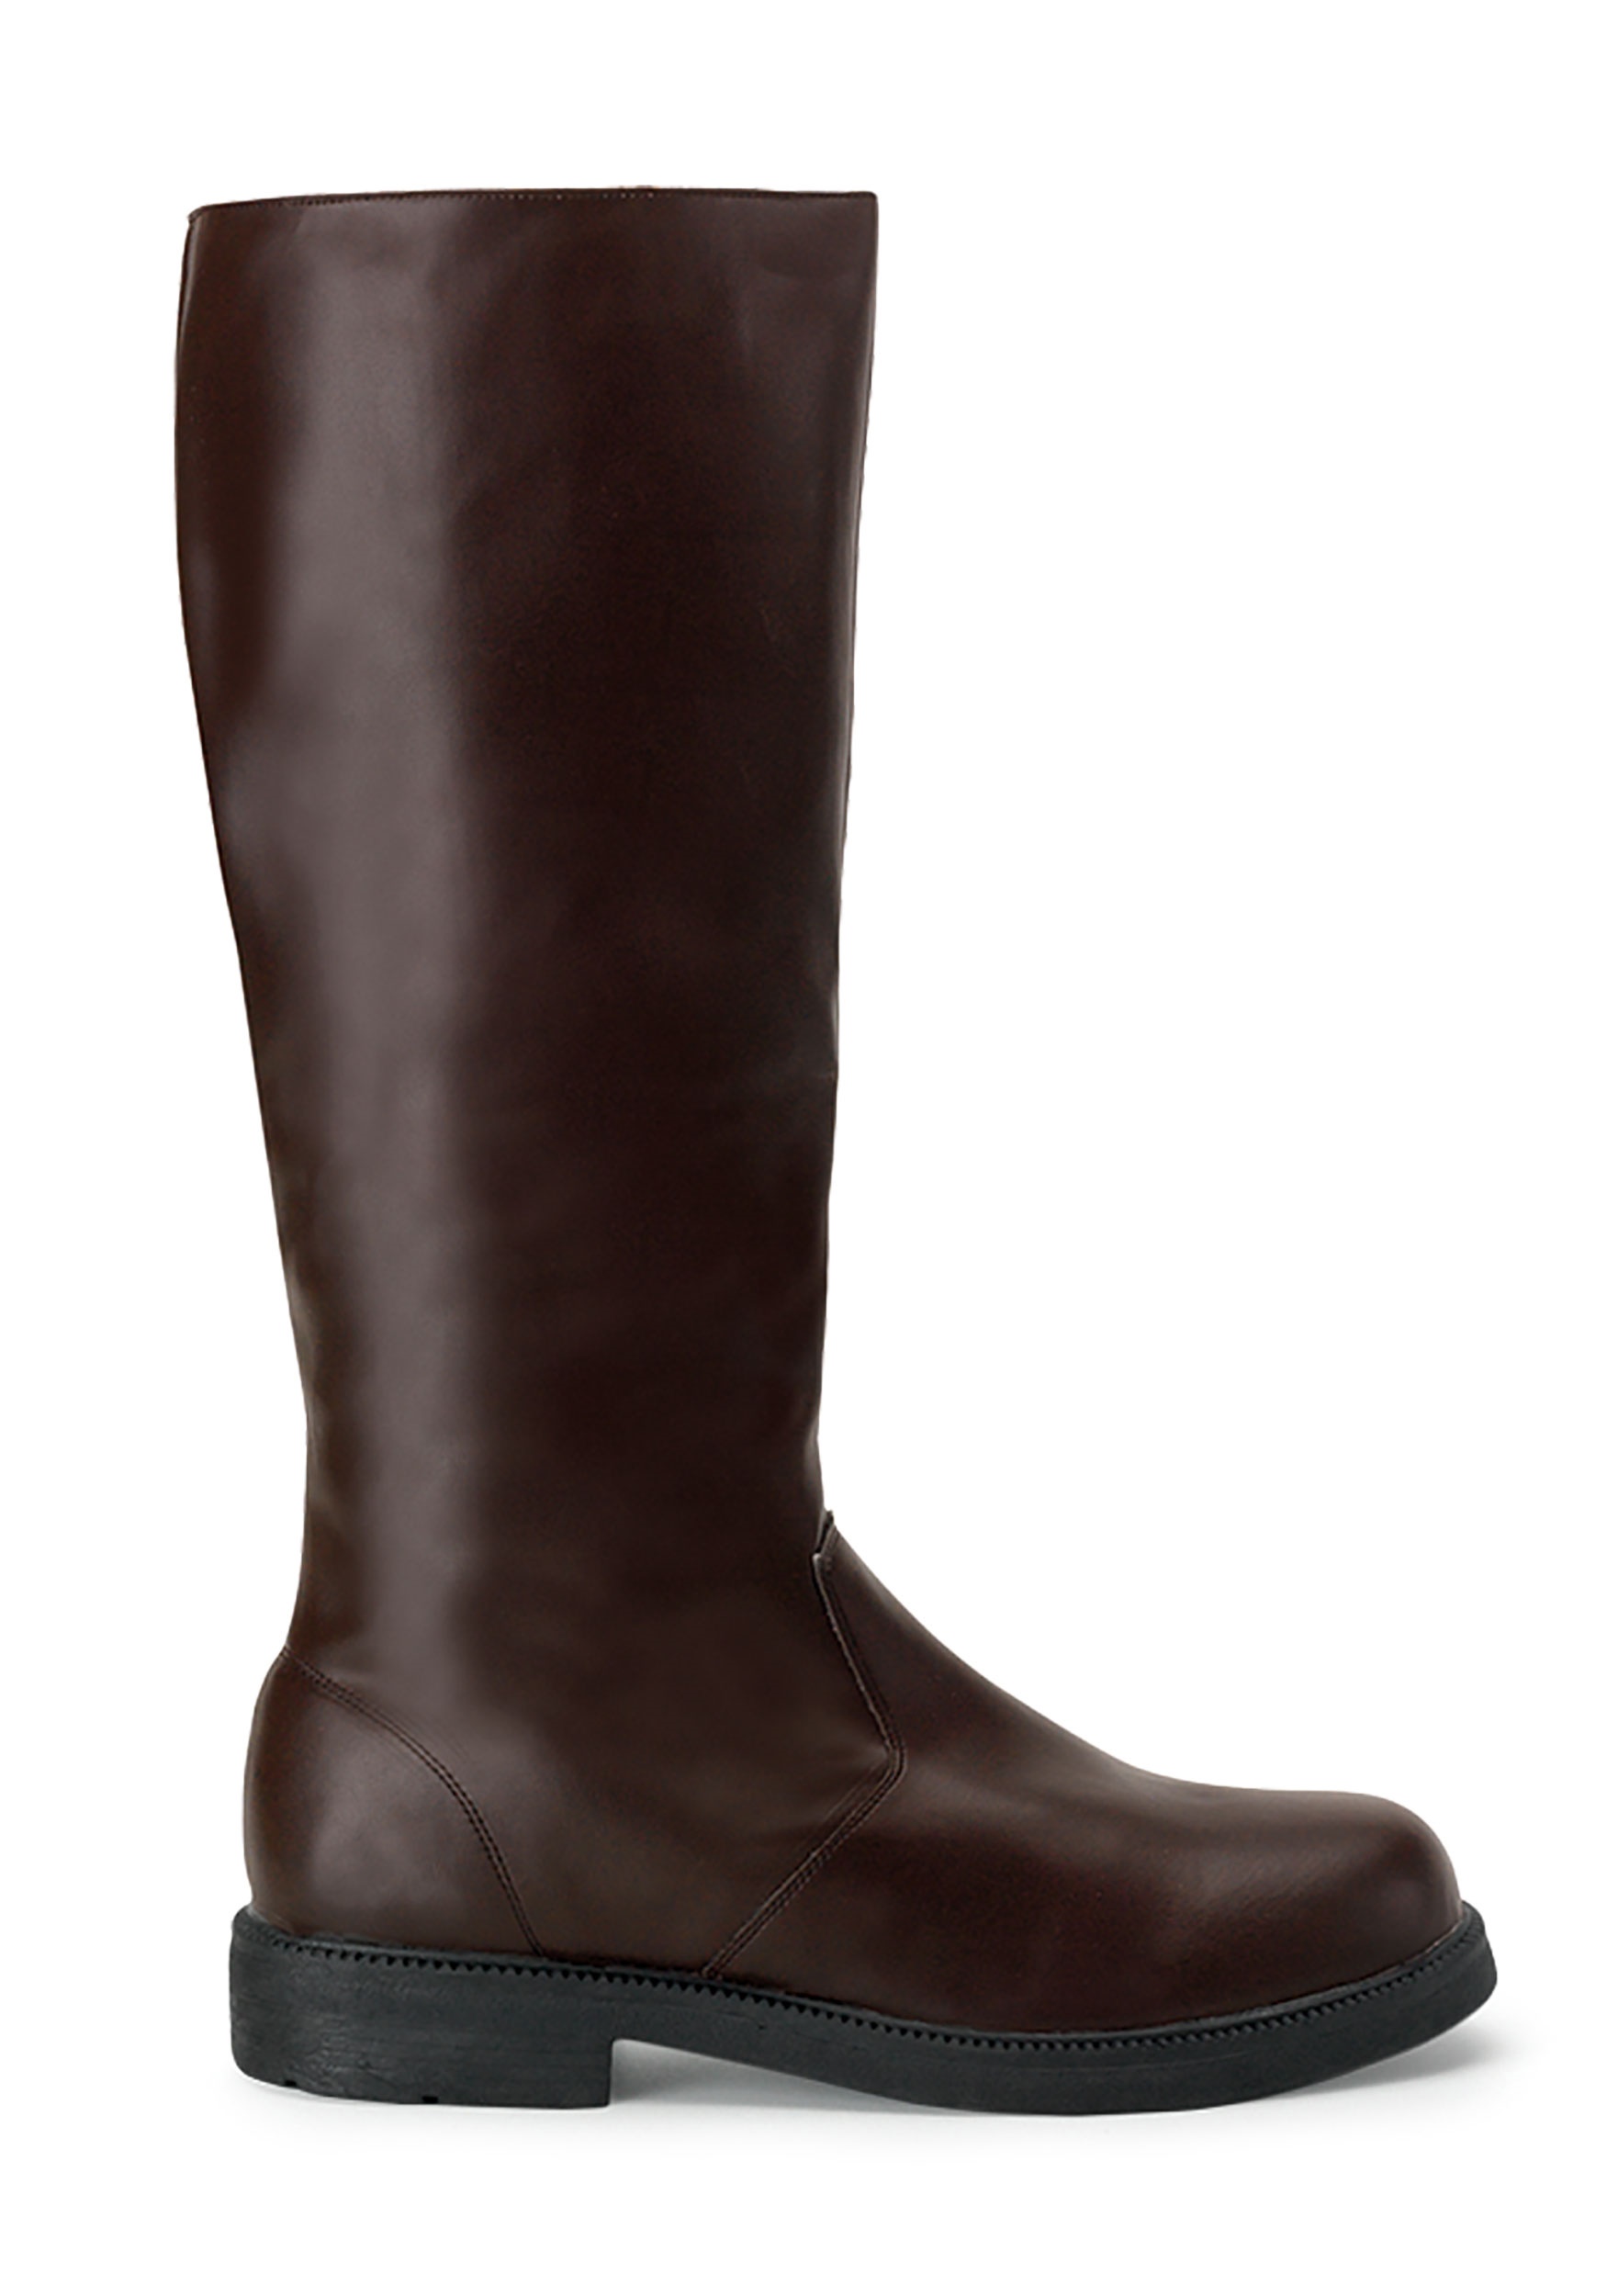 Brown Costume Boots for Adults